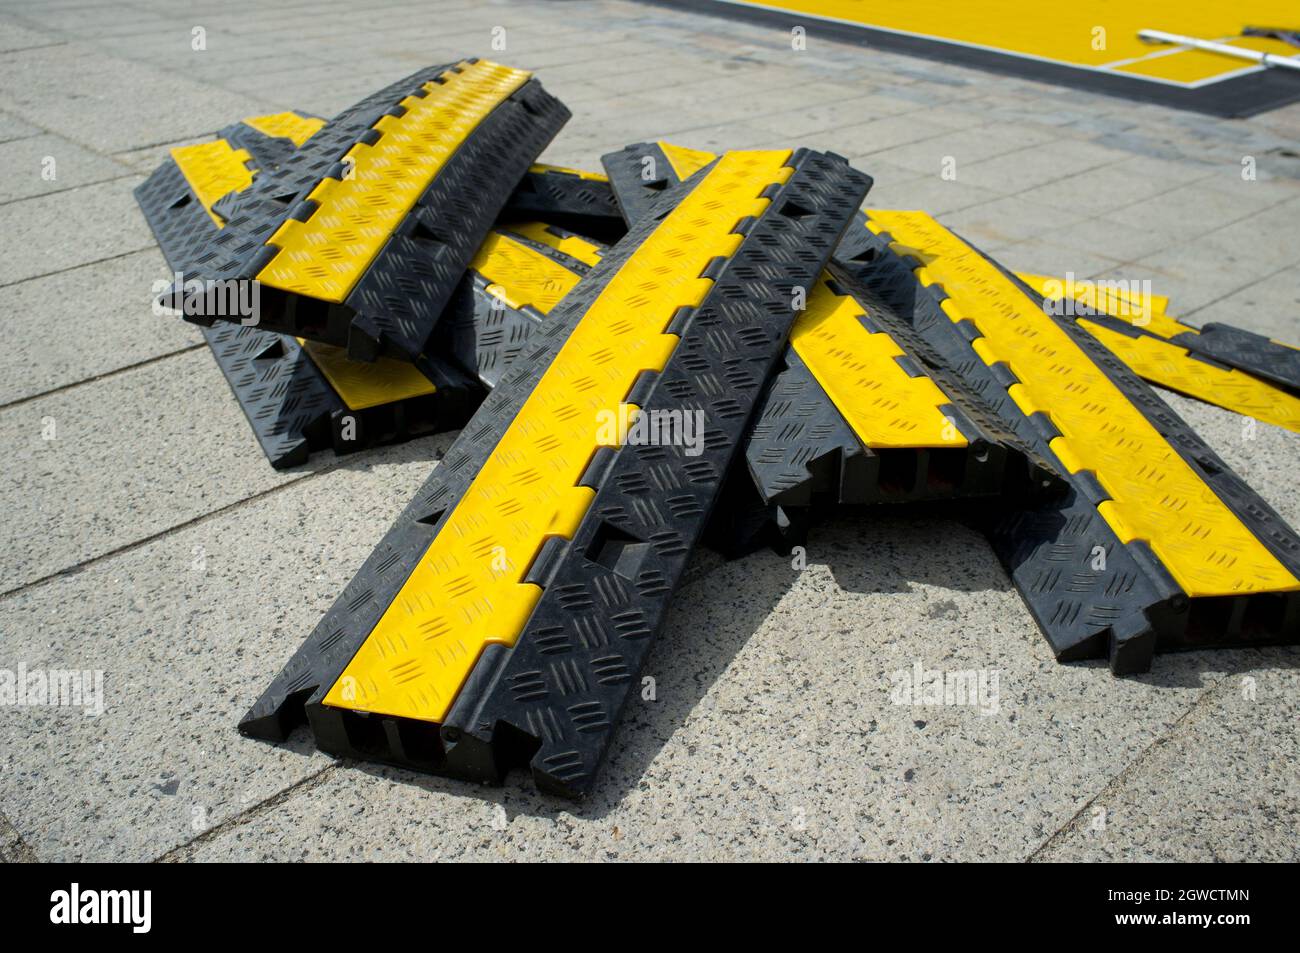 Rubber two channel protector ramp pilled up over urban historic quarter granite floor. Heavy duty cable protectors next to event site Stock Photo